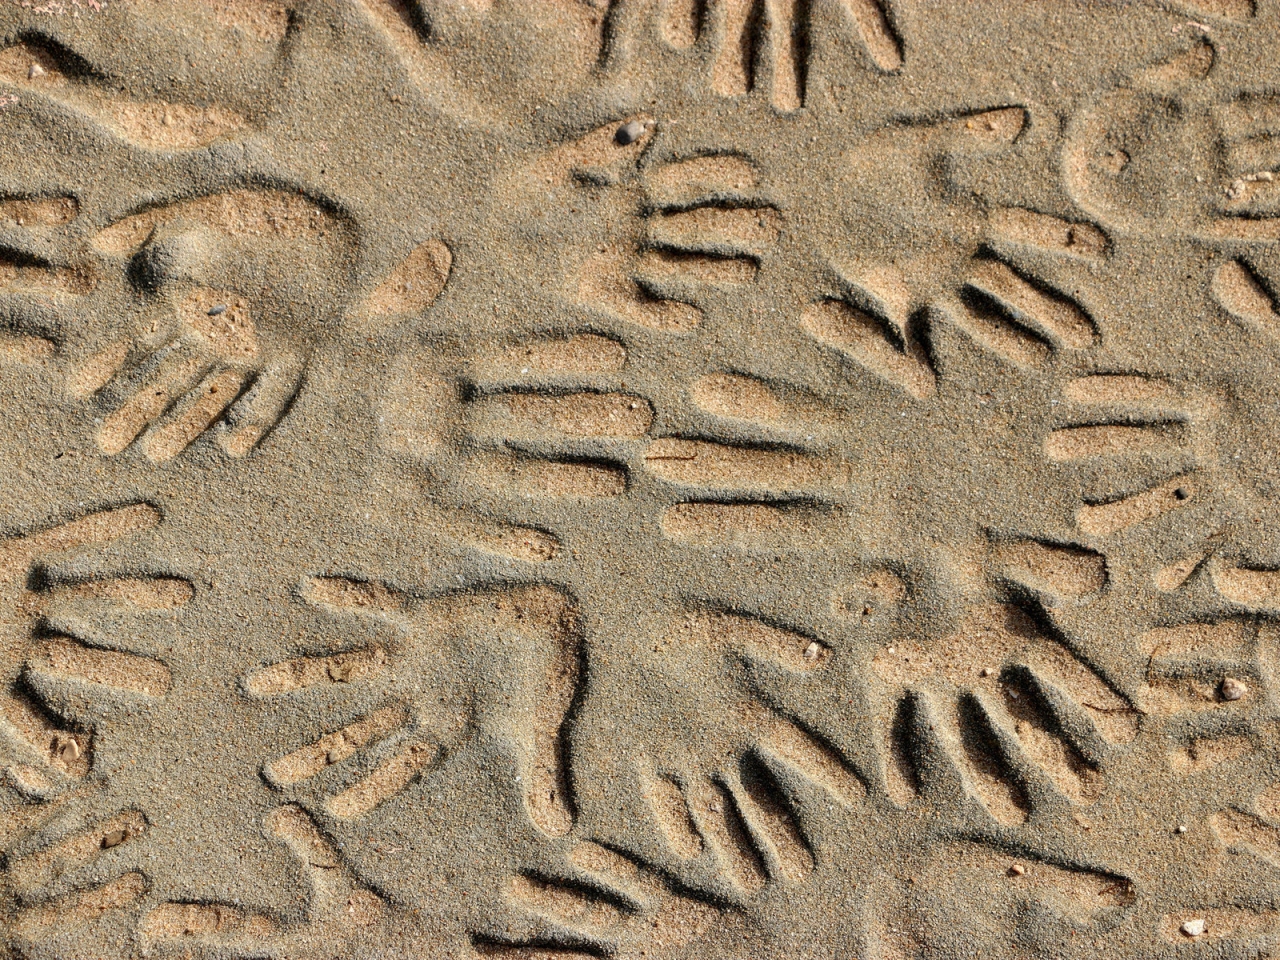 Handprints in the Sand for 1280 x 960 resolution